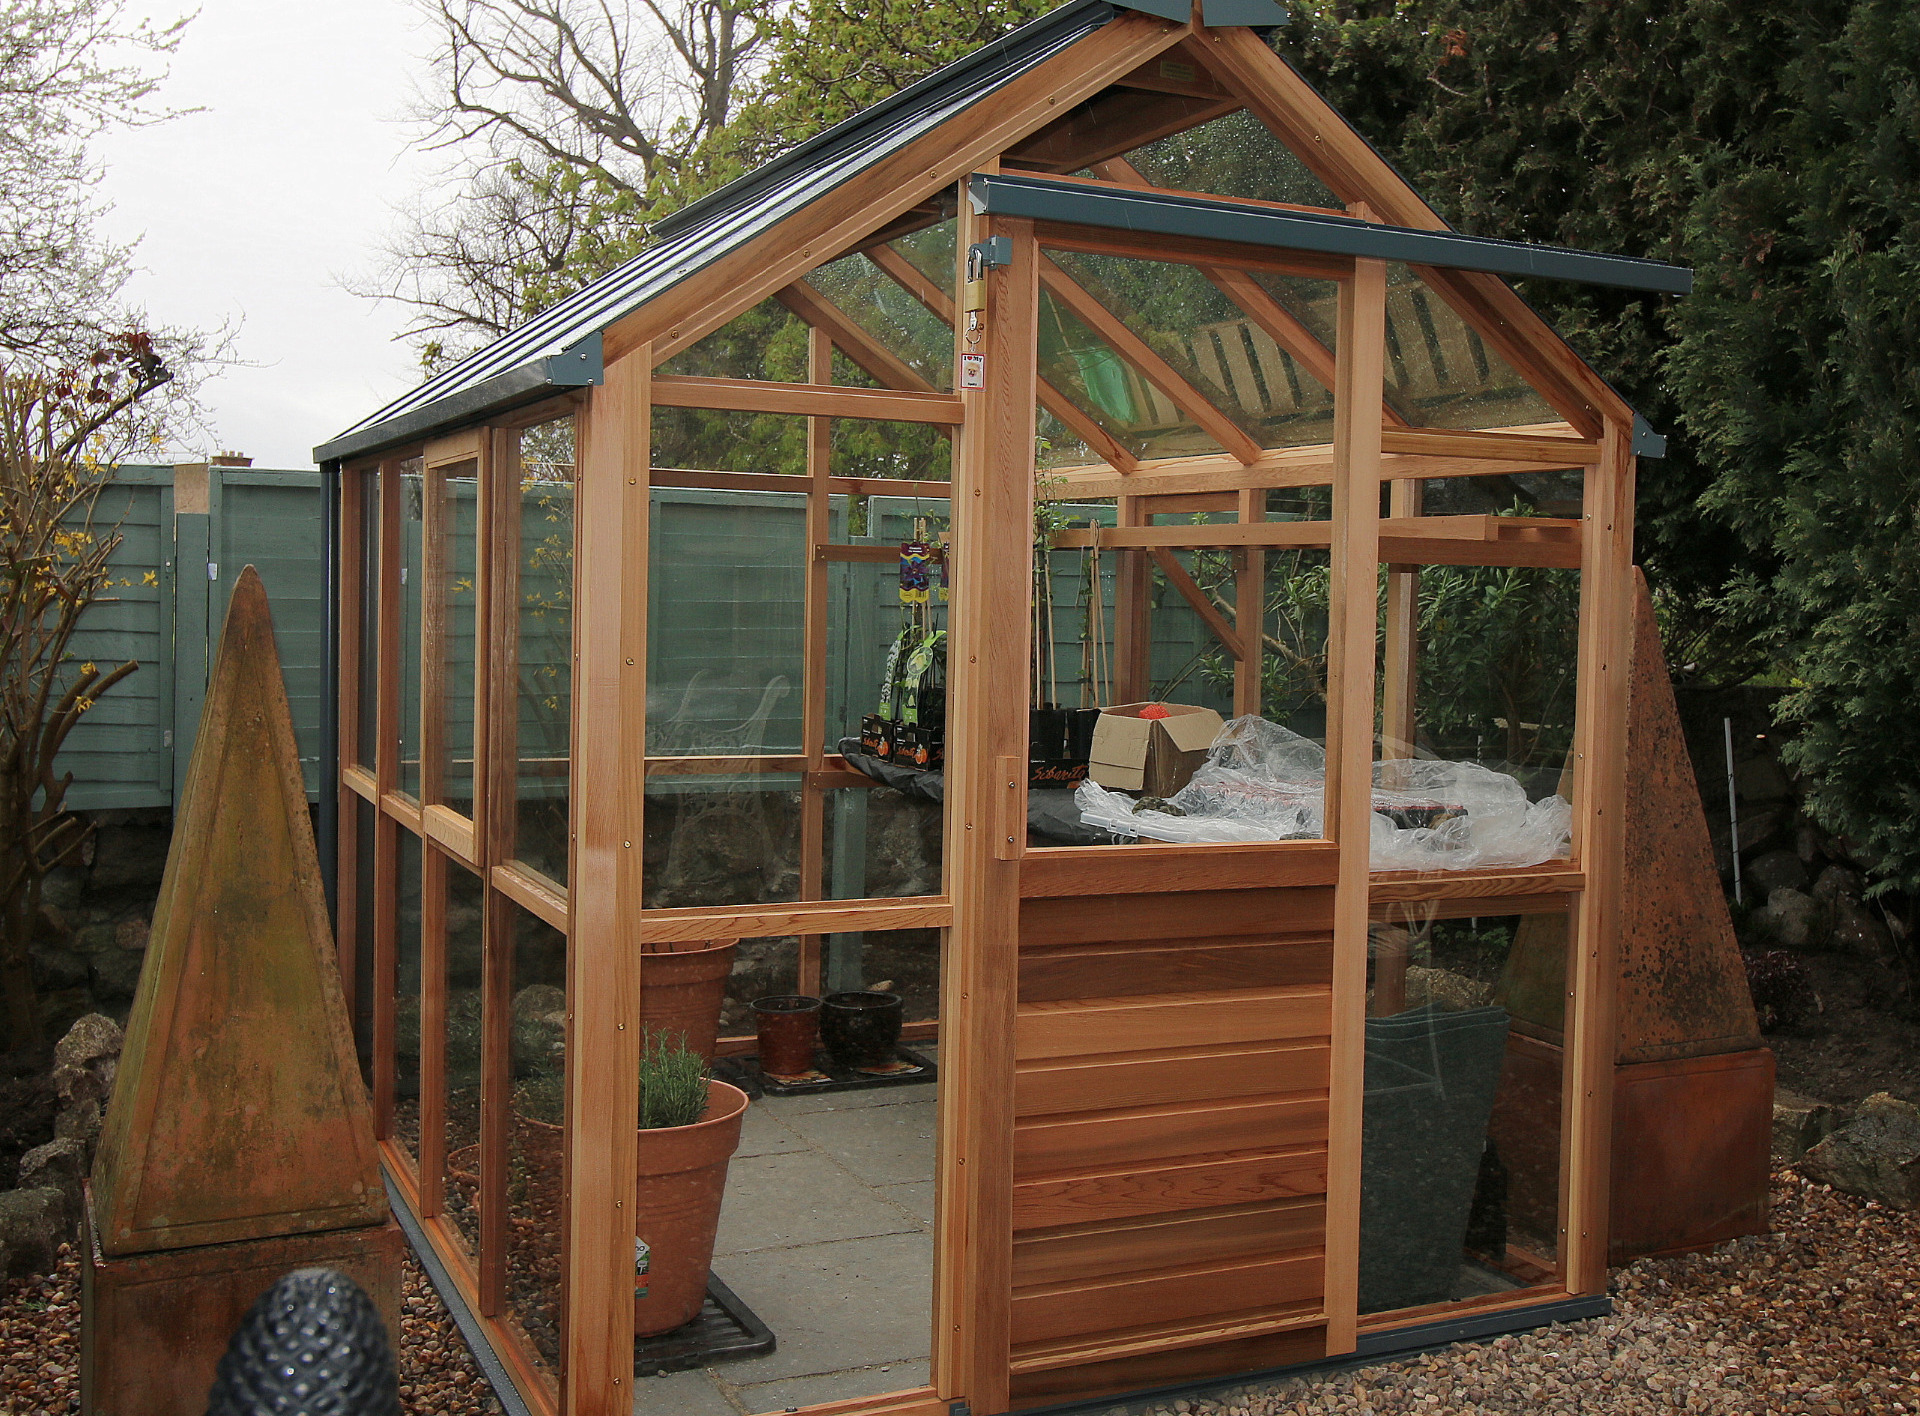 Gabriel Ash Classic Six Greenhouse in Dundrum, Dublin 18 | the only timber greenhouses endorsed by the RHS | Owen Chubb  087-2306128